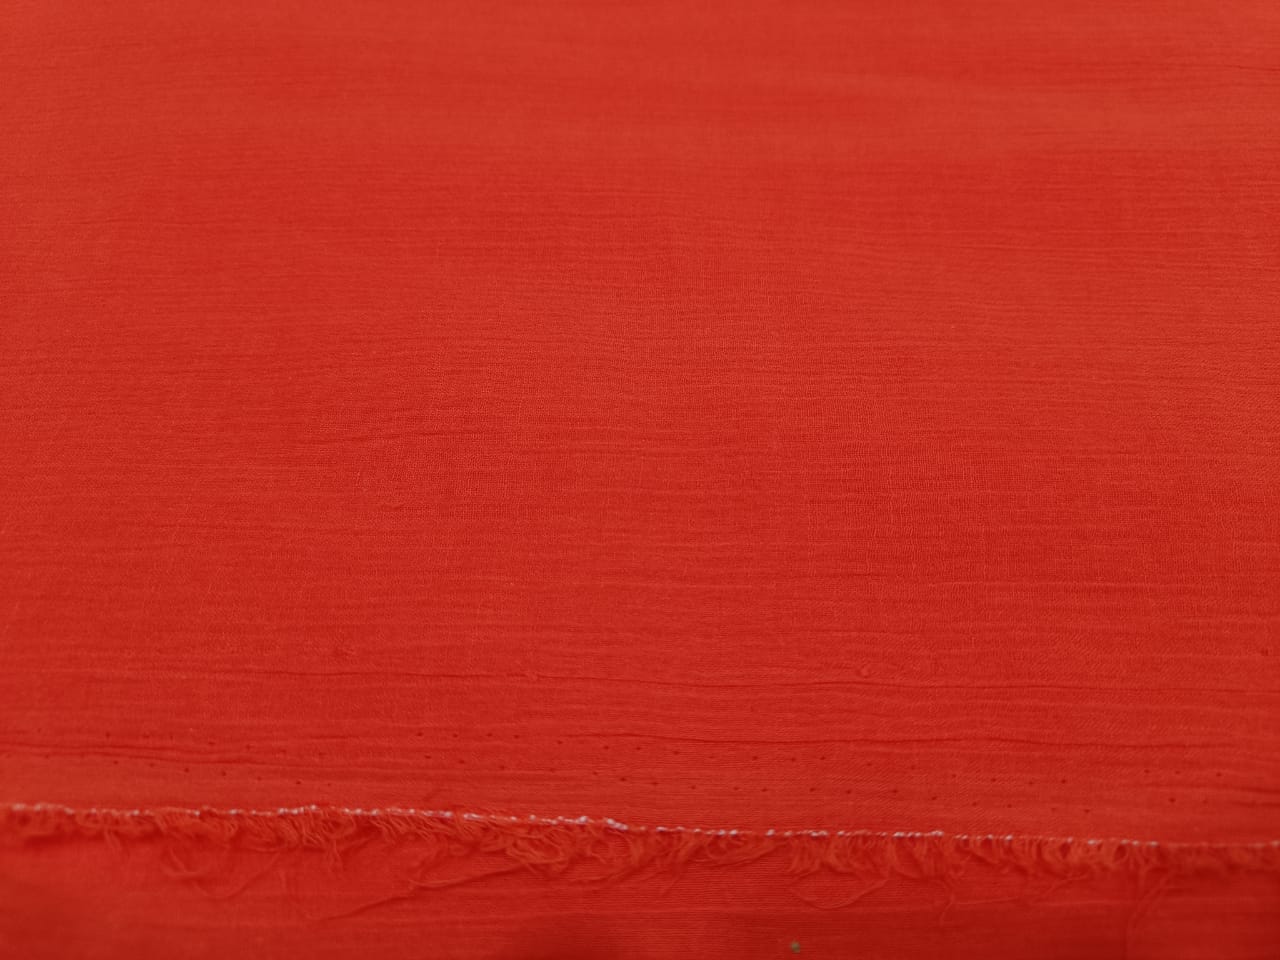 Cotton crush crepe deep orange color fabric 58" wide available in 2 colors deep orange and black